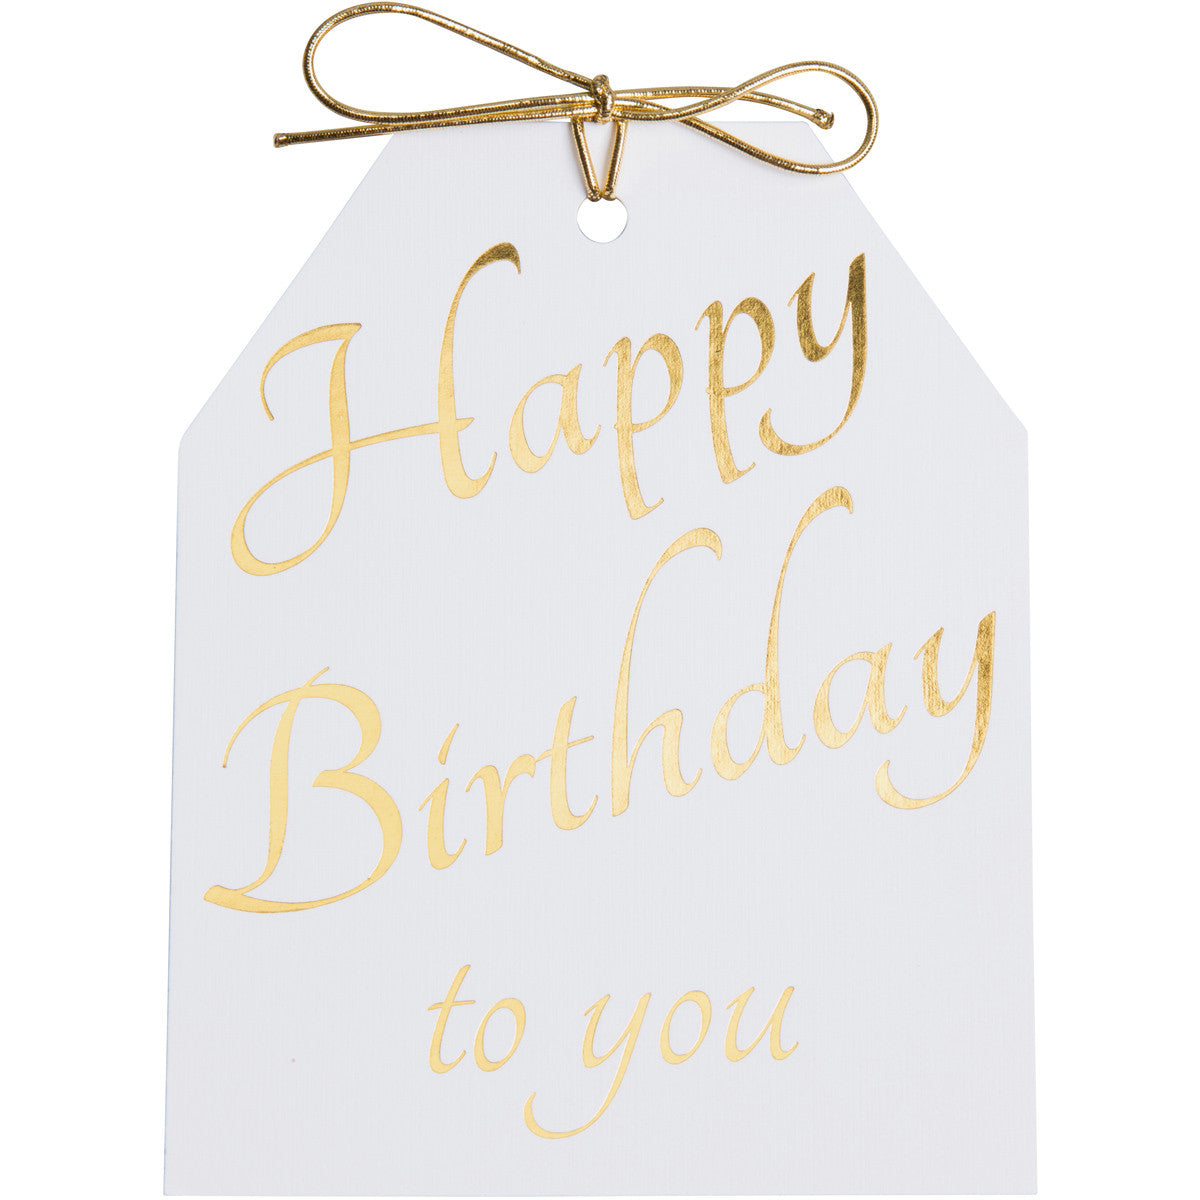 Gold foil Happy Birthday to you gift tags. White linen paper with metallic gold tie. 4x5.5